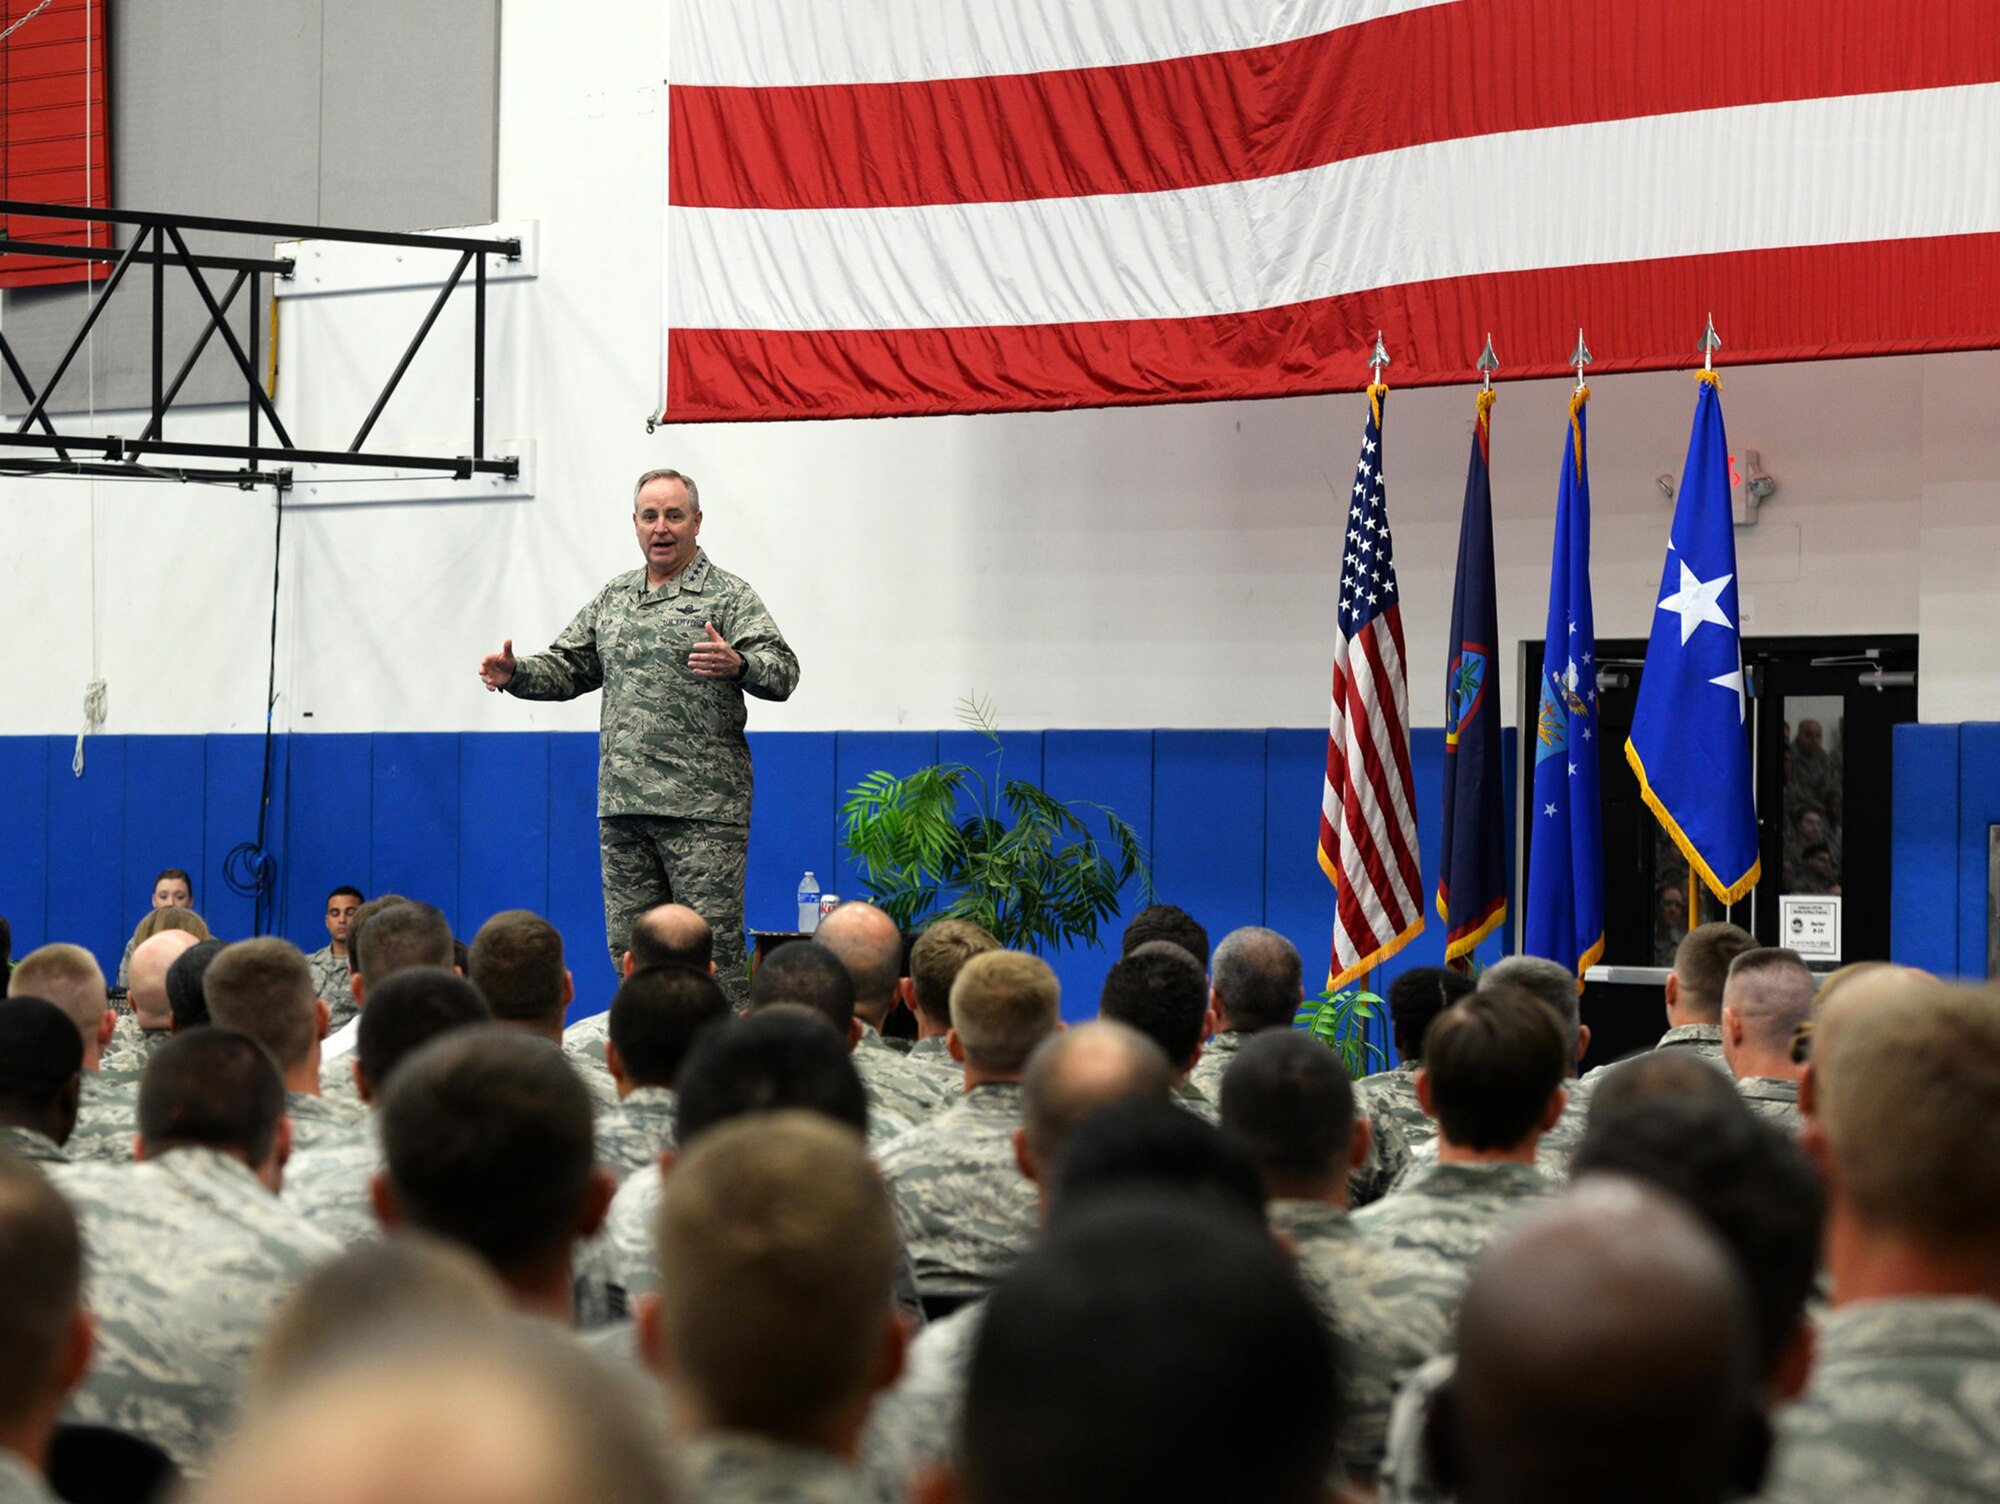 Air Force Chief of Staff Gen. Mark A. Welsh III speaks at an all call during his visit Jan. 21, 2016, at Andersen Air Force Base, Guam. During the all call, Welsh discussed the strategic advantage Guam has in Indo-Asia Pacific theater and thanked Airmen for their dedication and support. (U.S. Air Force photo/Senior Airman Cierra Presentado)